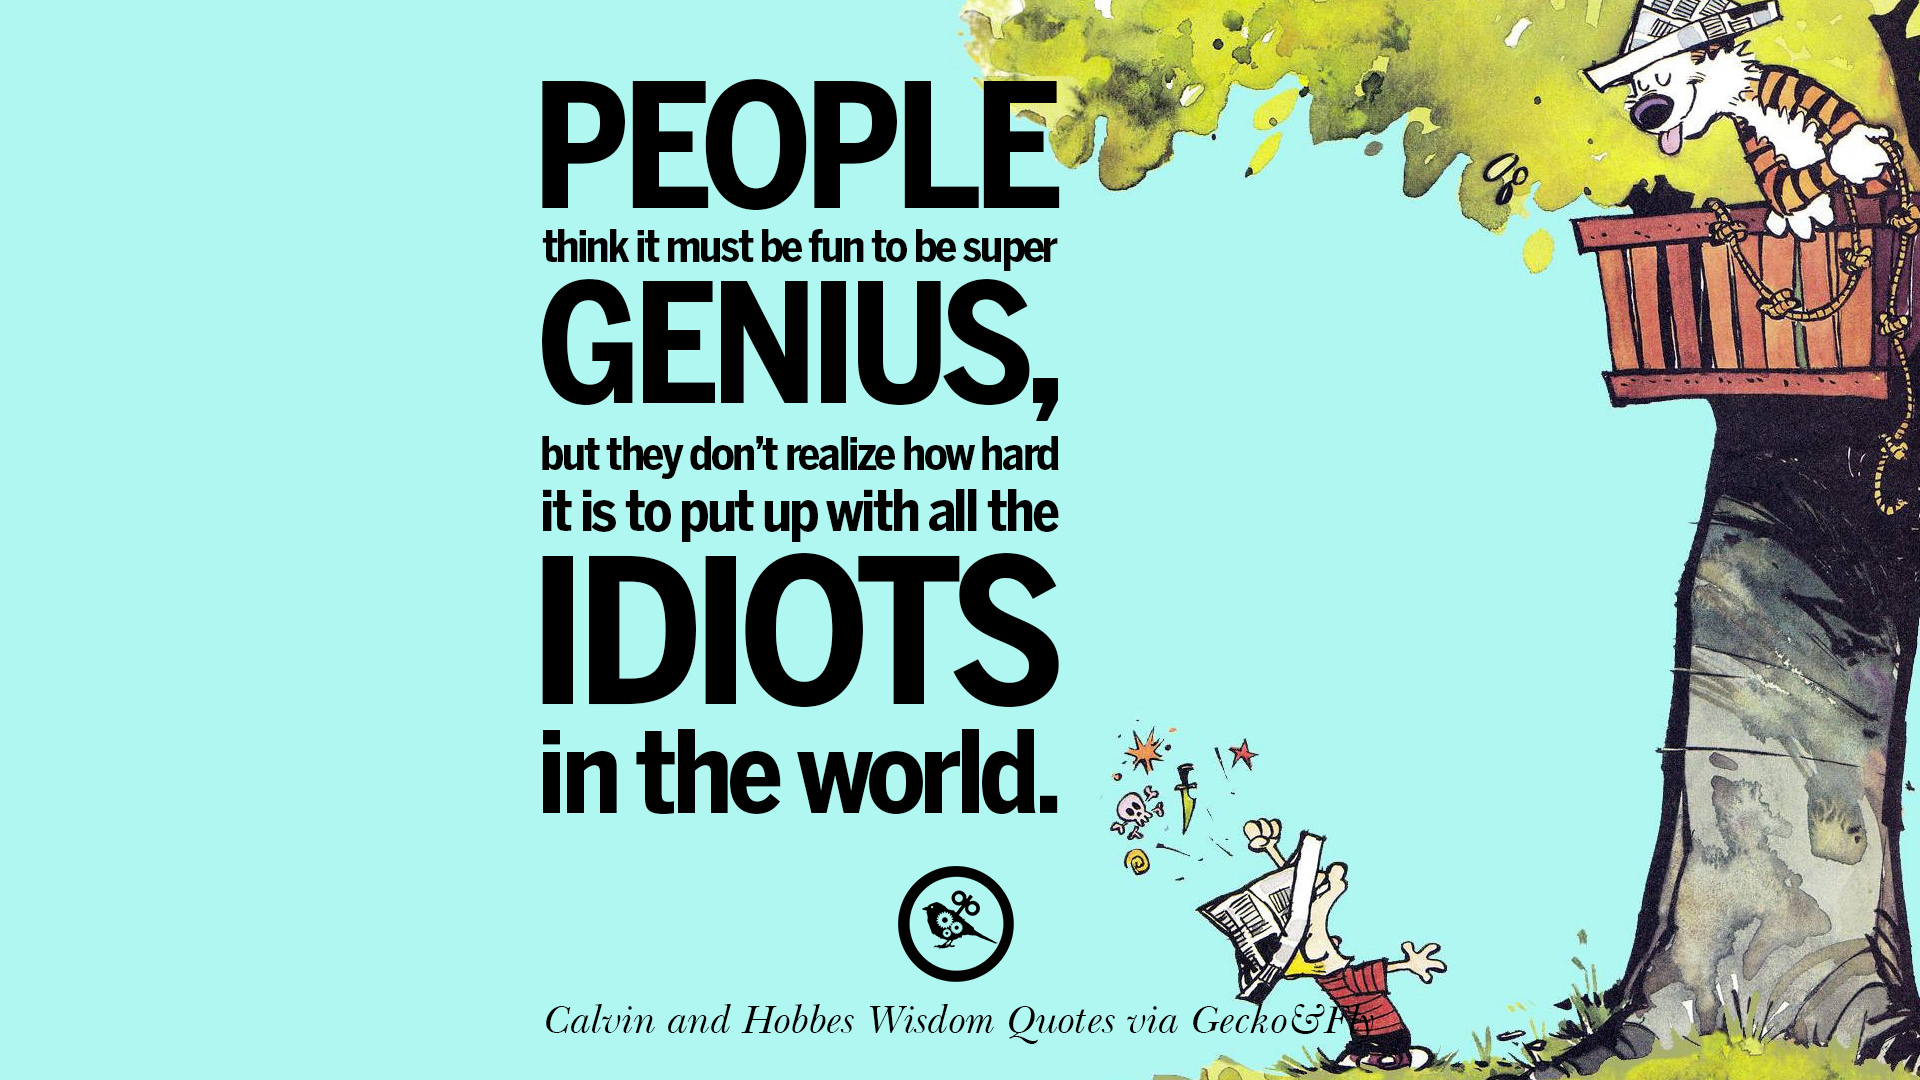 10 Calvin And Hobbes Words Of Wisdom Quotes And Wise Sayings